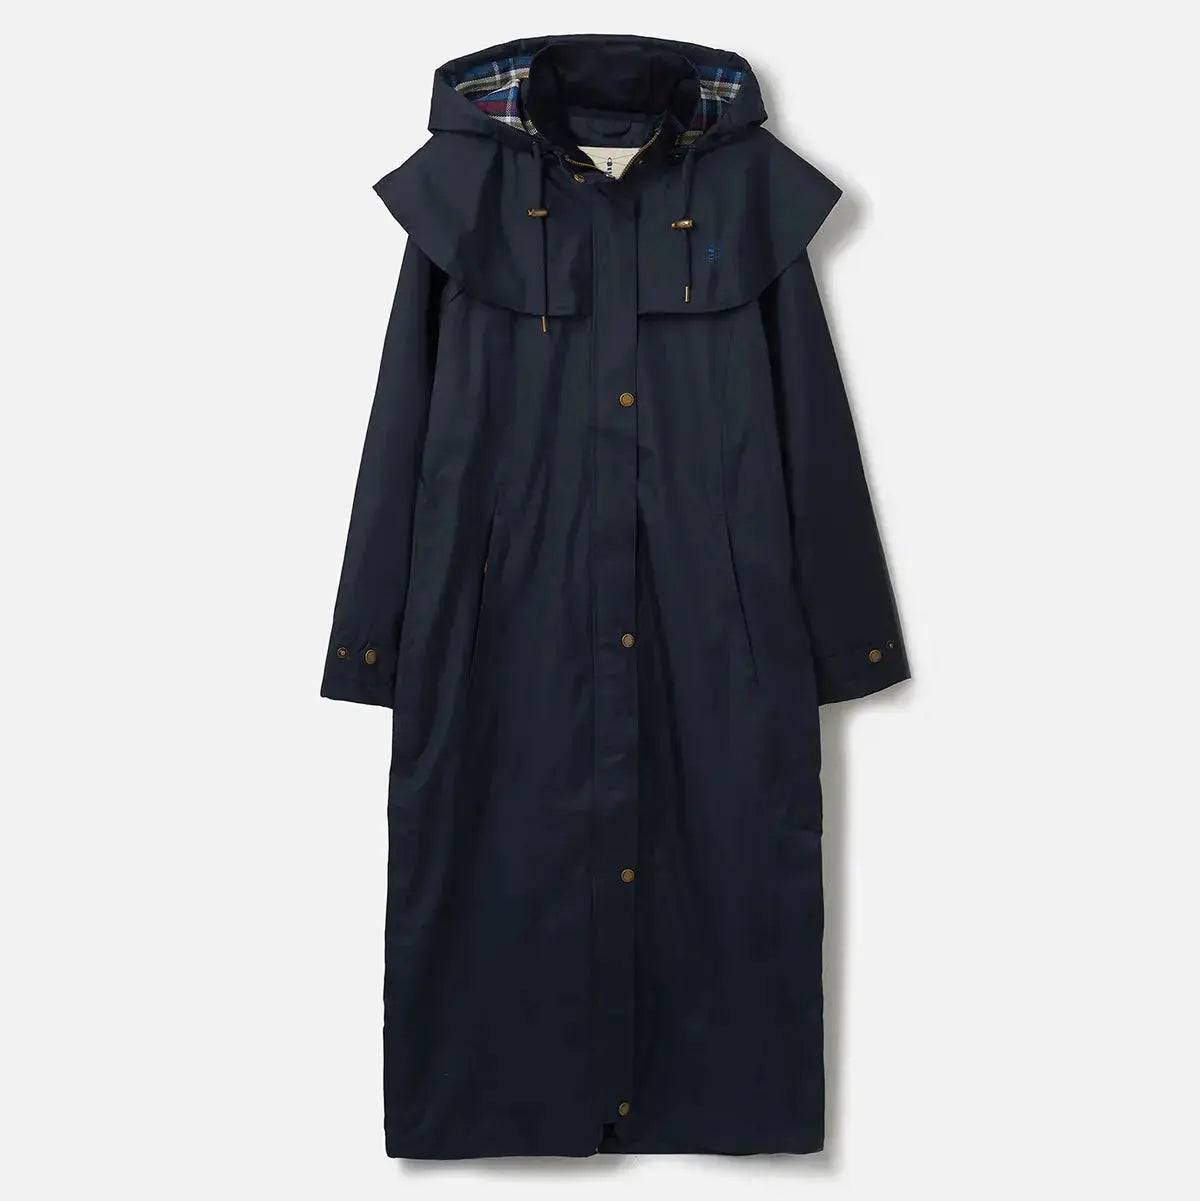 Lighthouse Outback Full Length Waterproof Raincoat Nightshade 10 Lighthouse Outdoor Coats & Jackets Barnstaple Equestrian Supplies